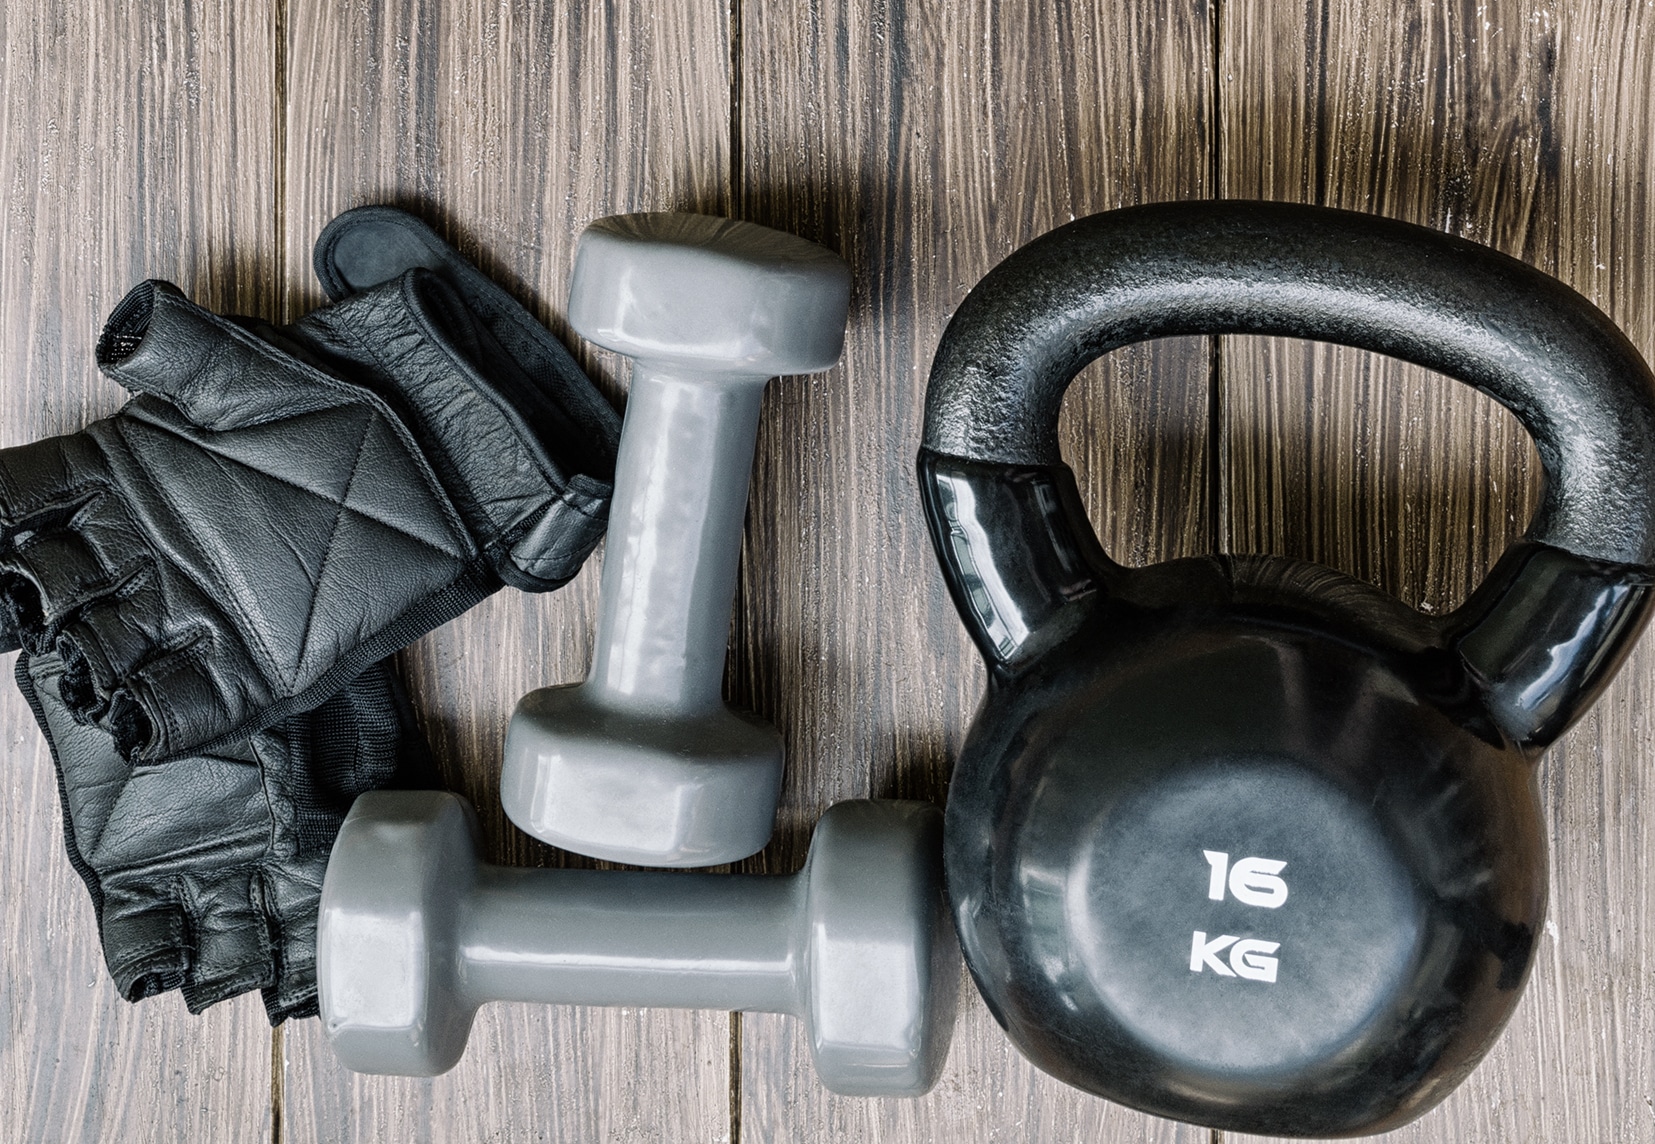 Gray dumbbells and black kettlebell with workout gloves on wood background